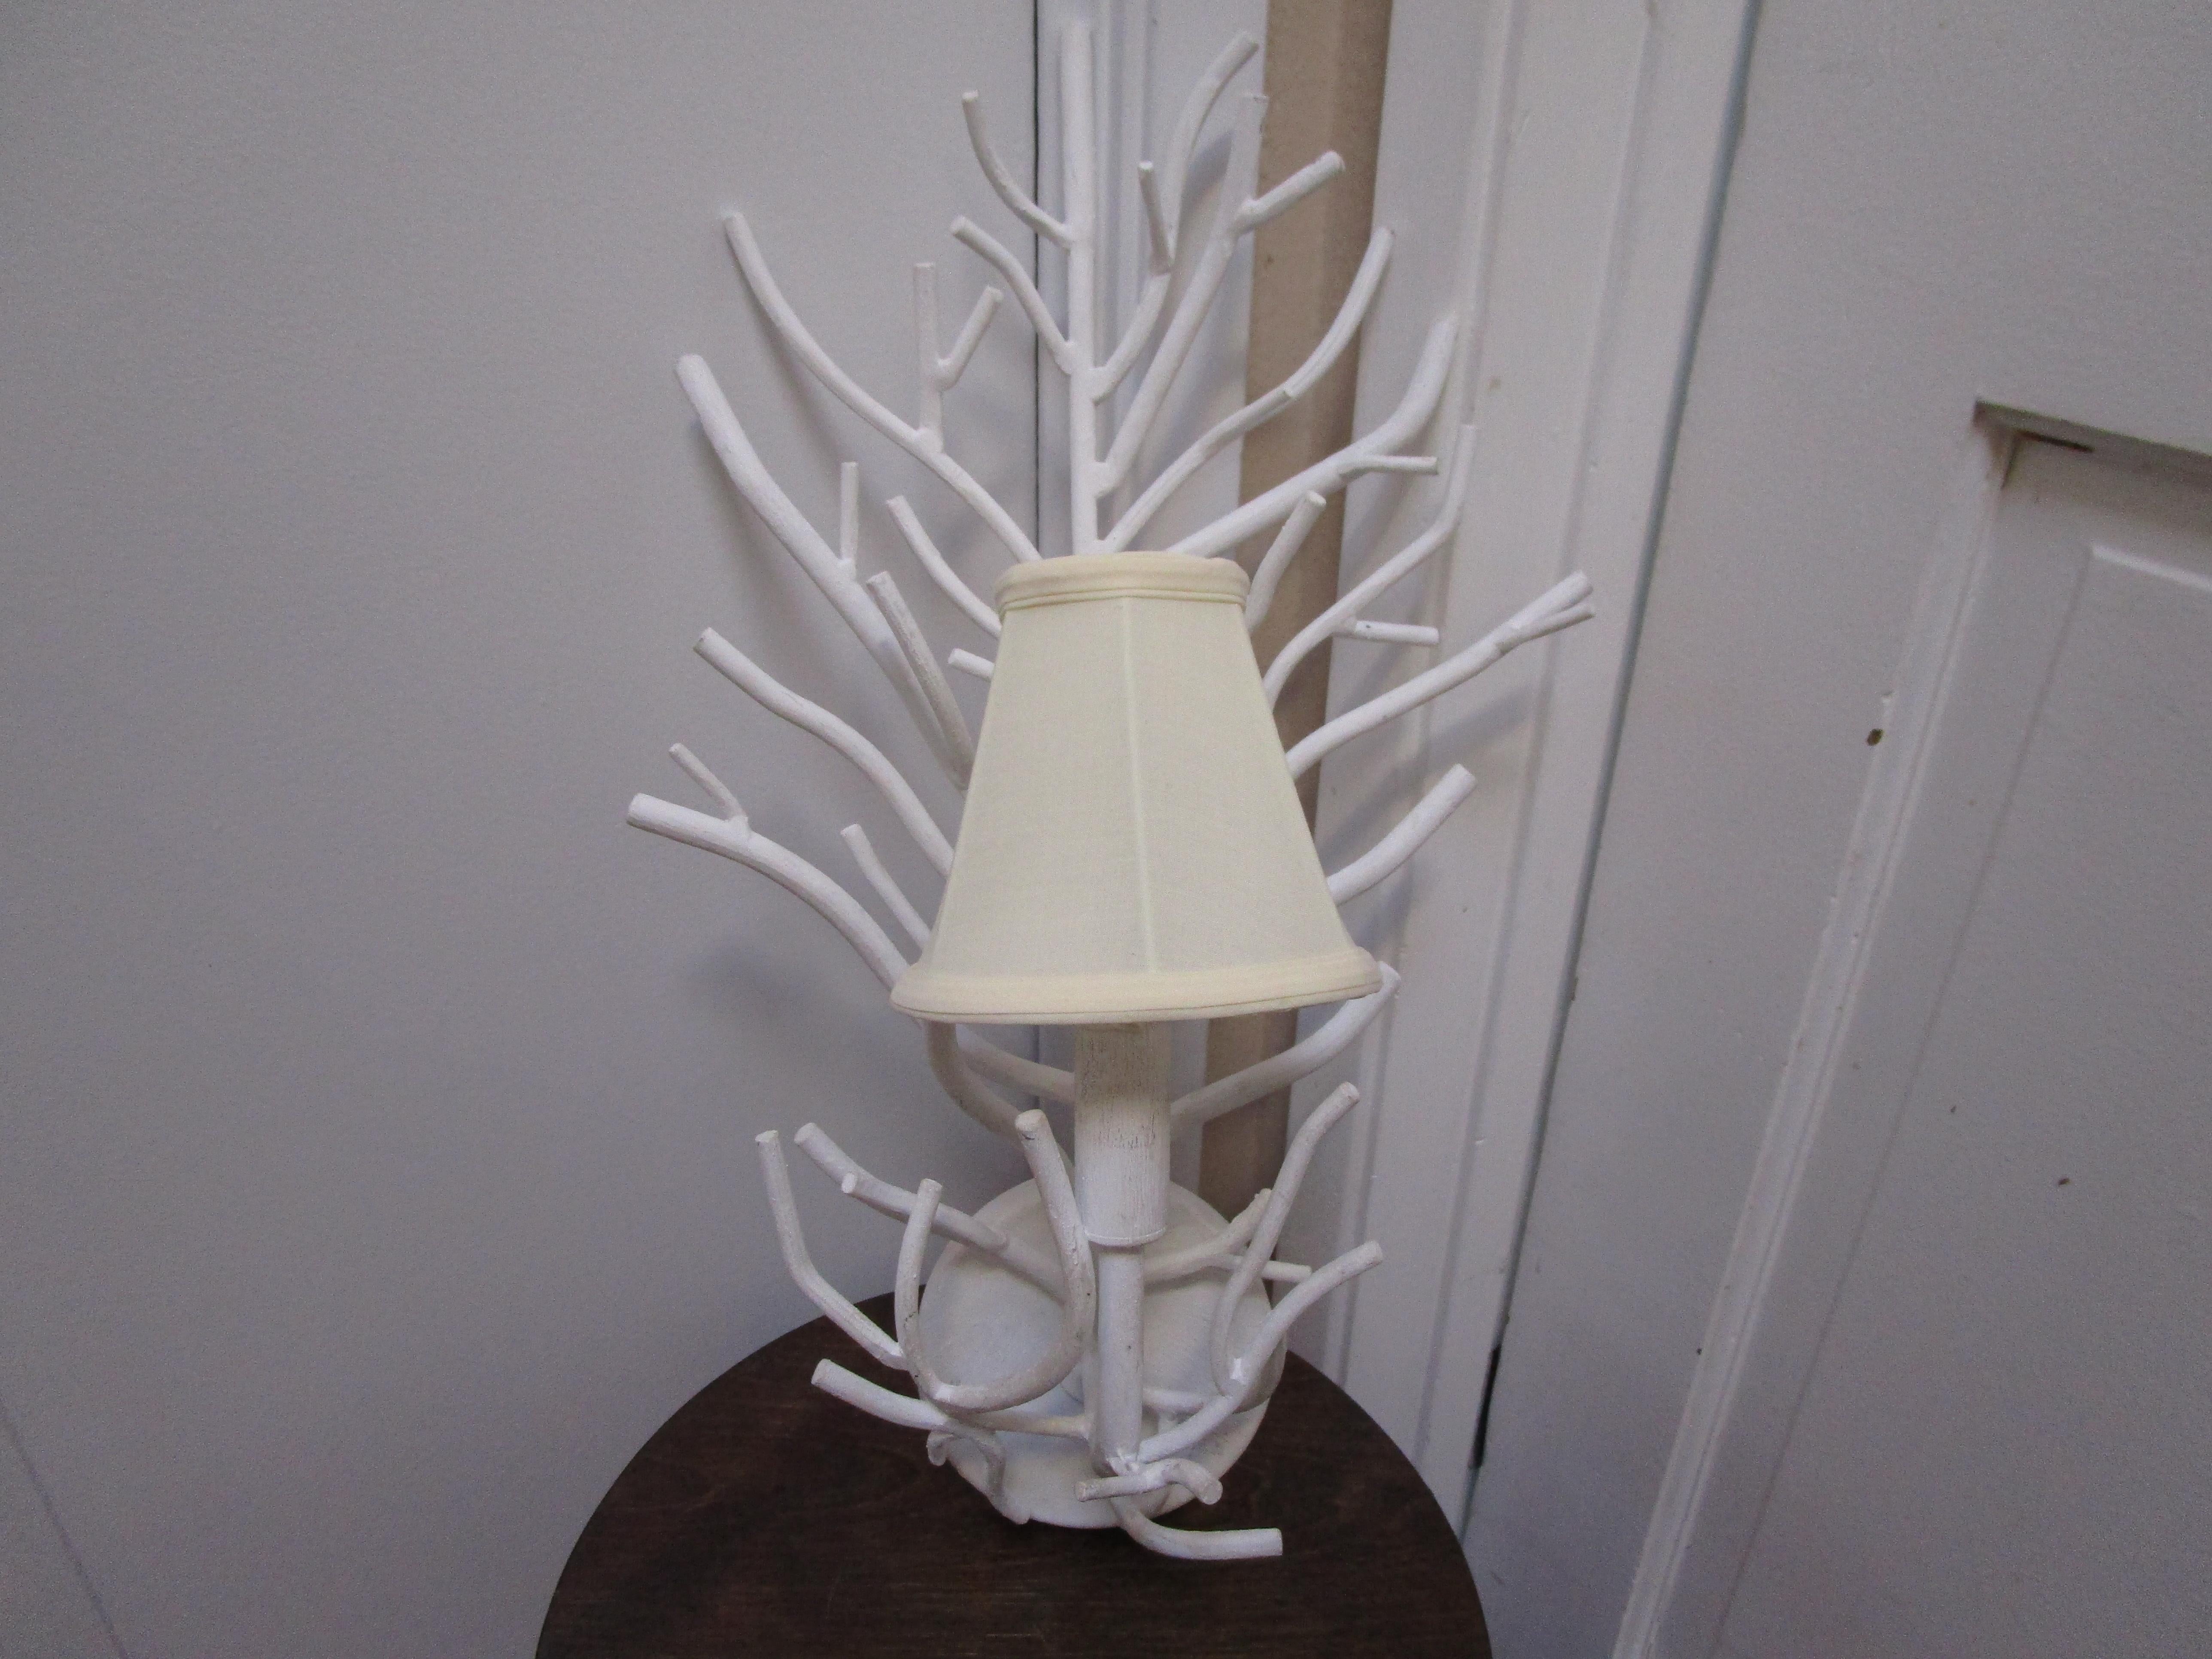 Coral effect or twig effect, the name of this beautiful sconce that we picked up at auction is not as important as the form and the statement lighting it can create. Nor is it as important as the set we have imagined for a designer in search of